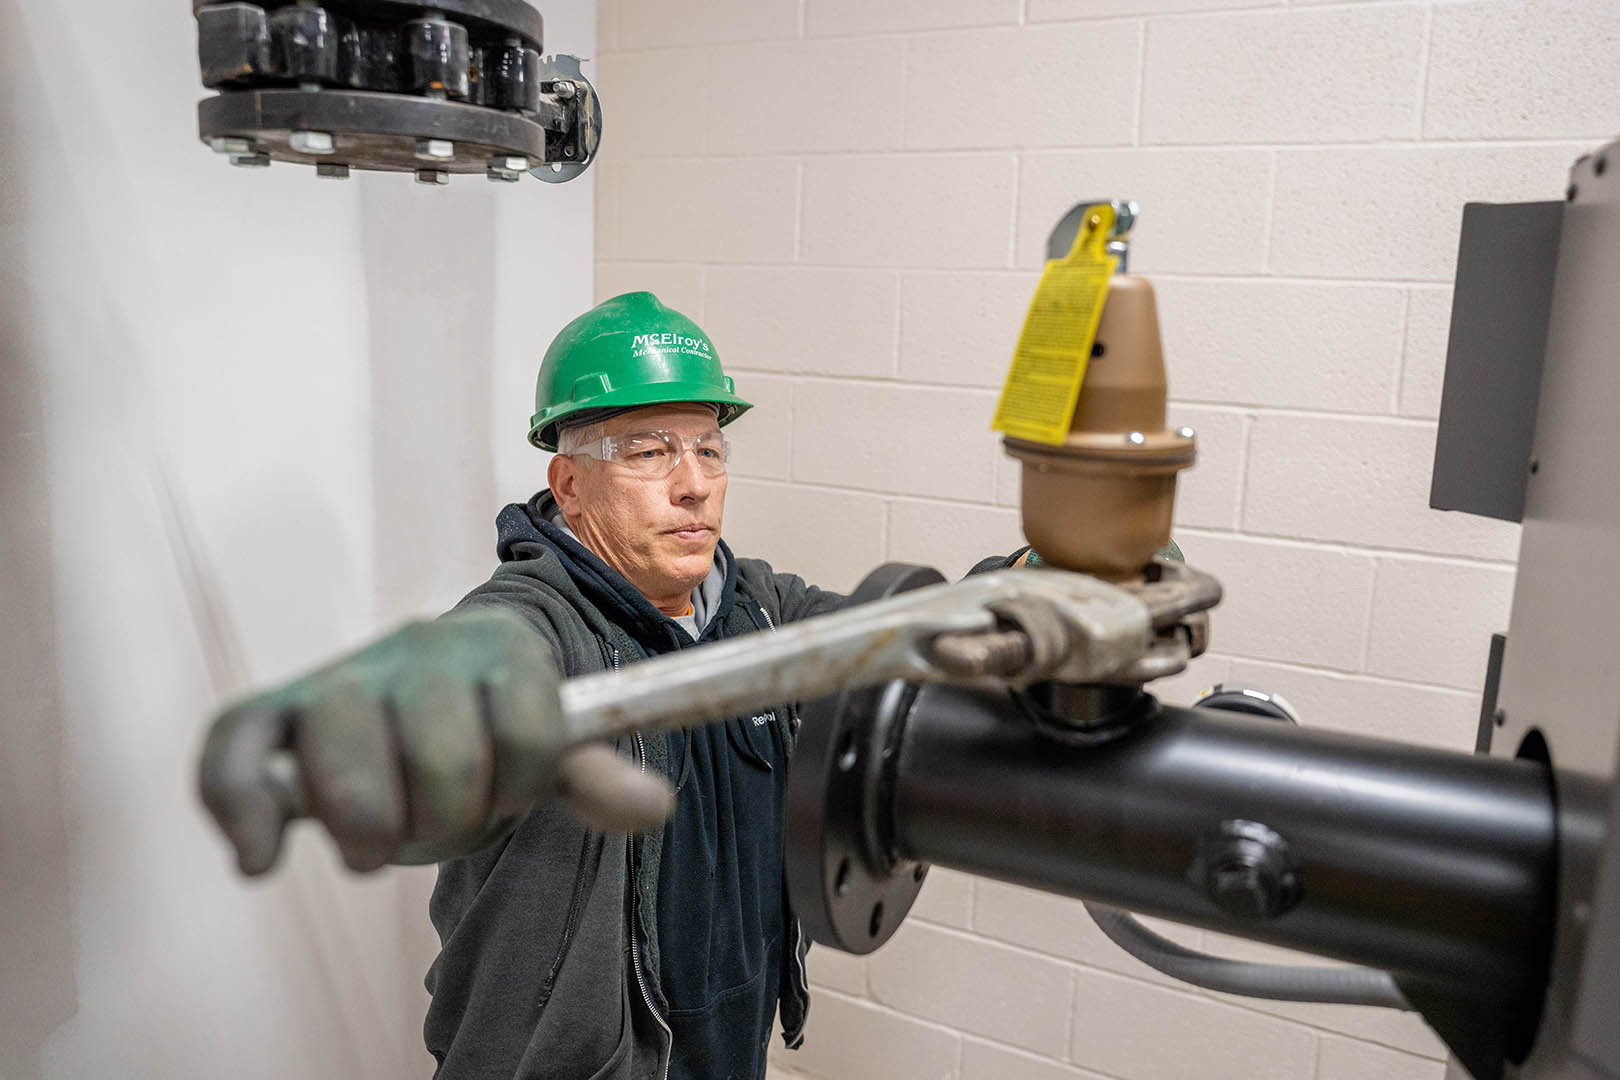 Jim Konrade of McElroy’s tightens a temperature/pressure relief fitting in a new medical facility’s hot-water system.